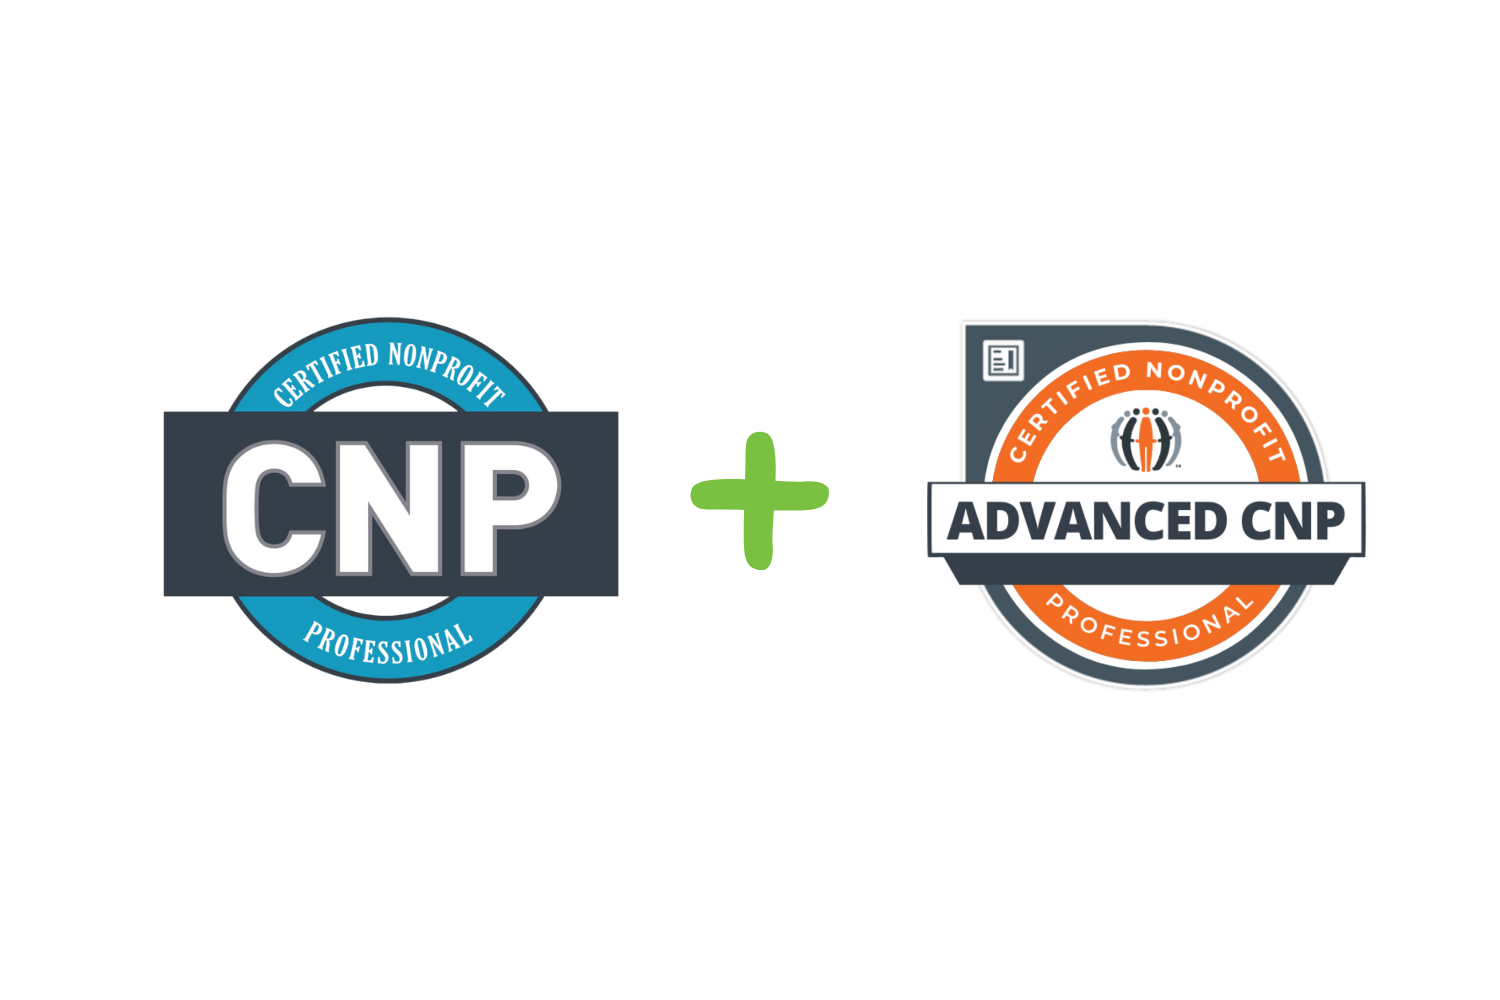 Bundle the CNP and Advanced CNP credential